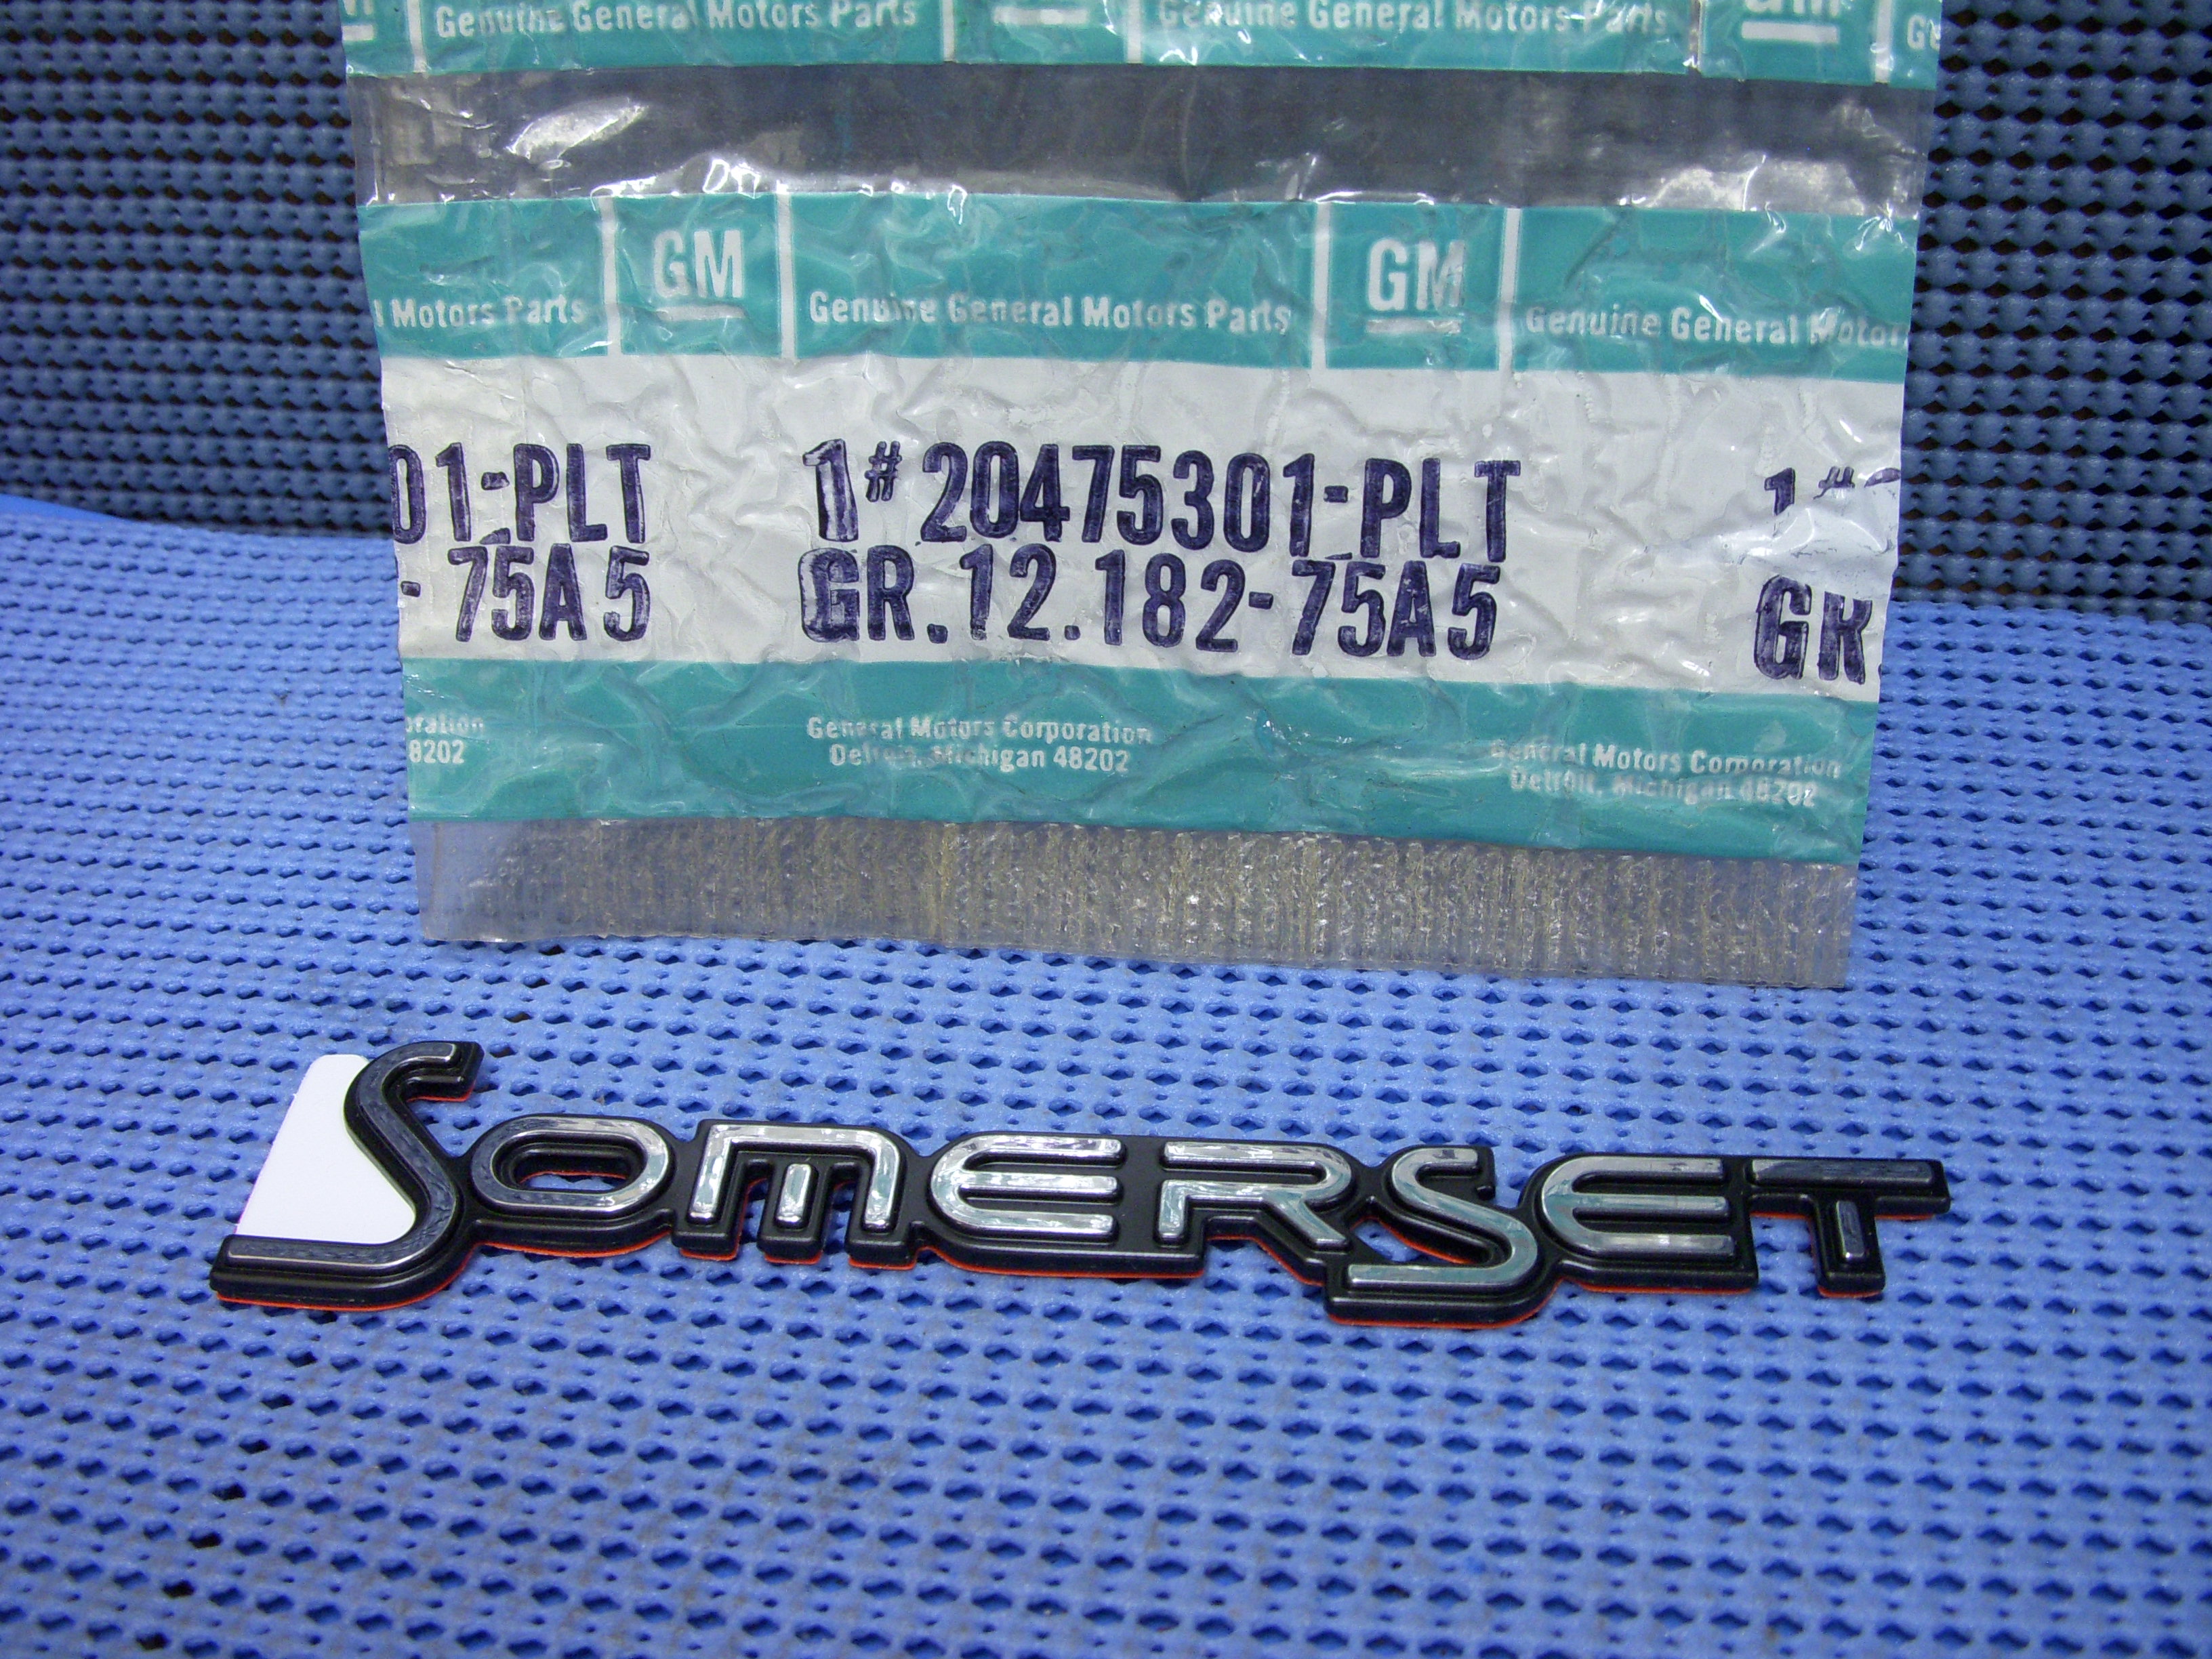 1987 Buick Front Fender, Rear End Panel and Tailgate Name Plate " Somerset" NOS # 20475301